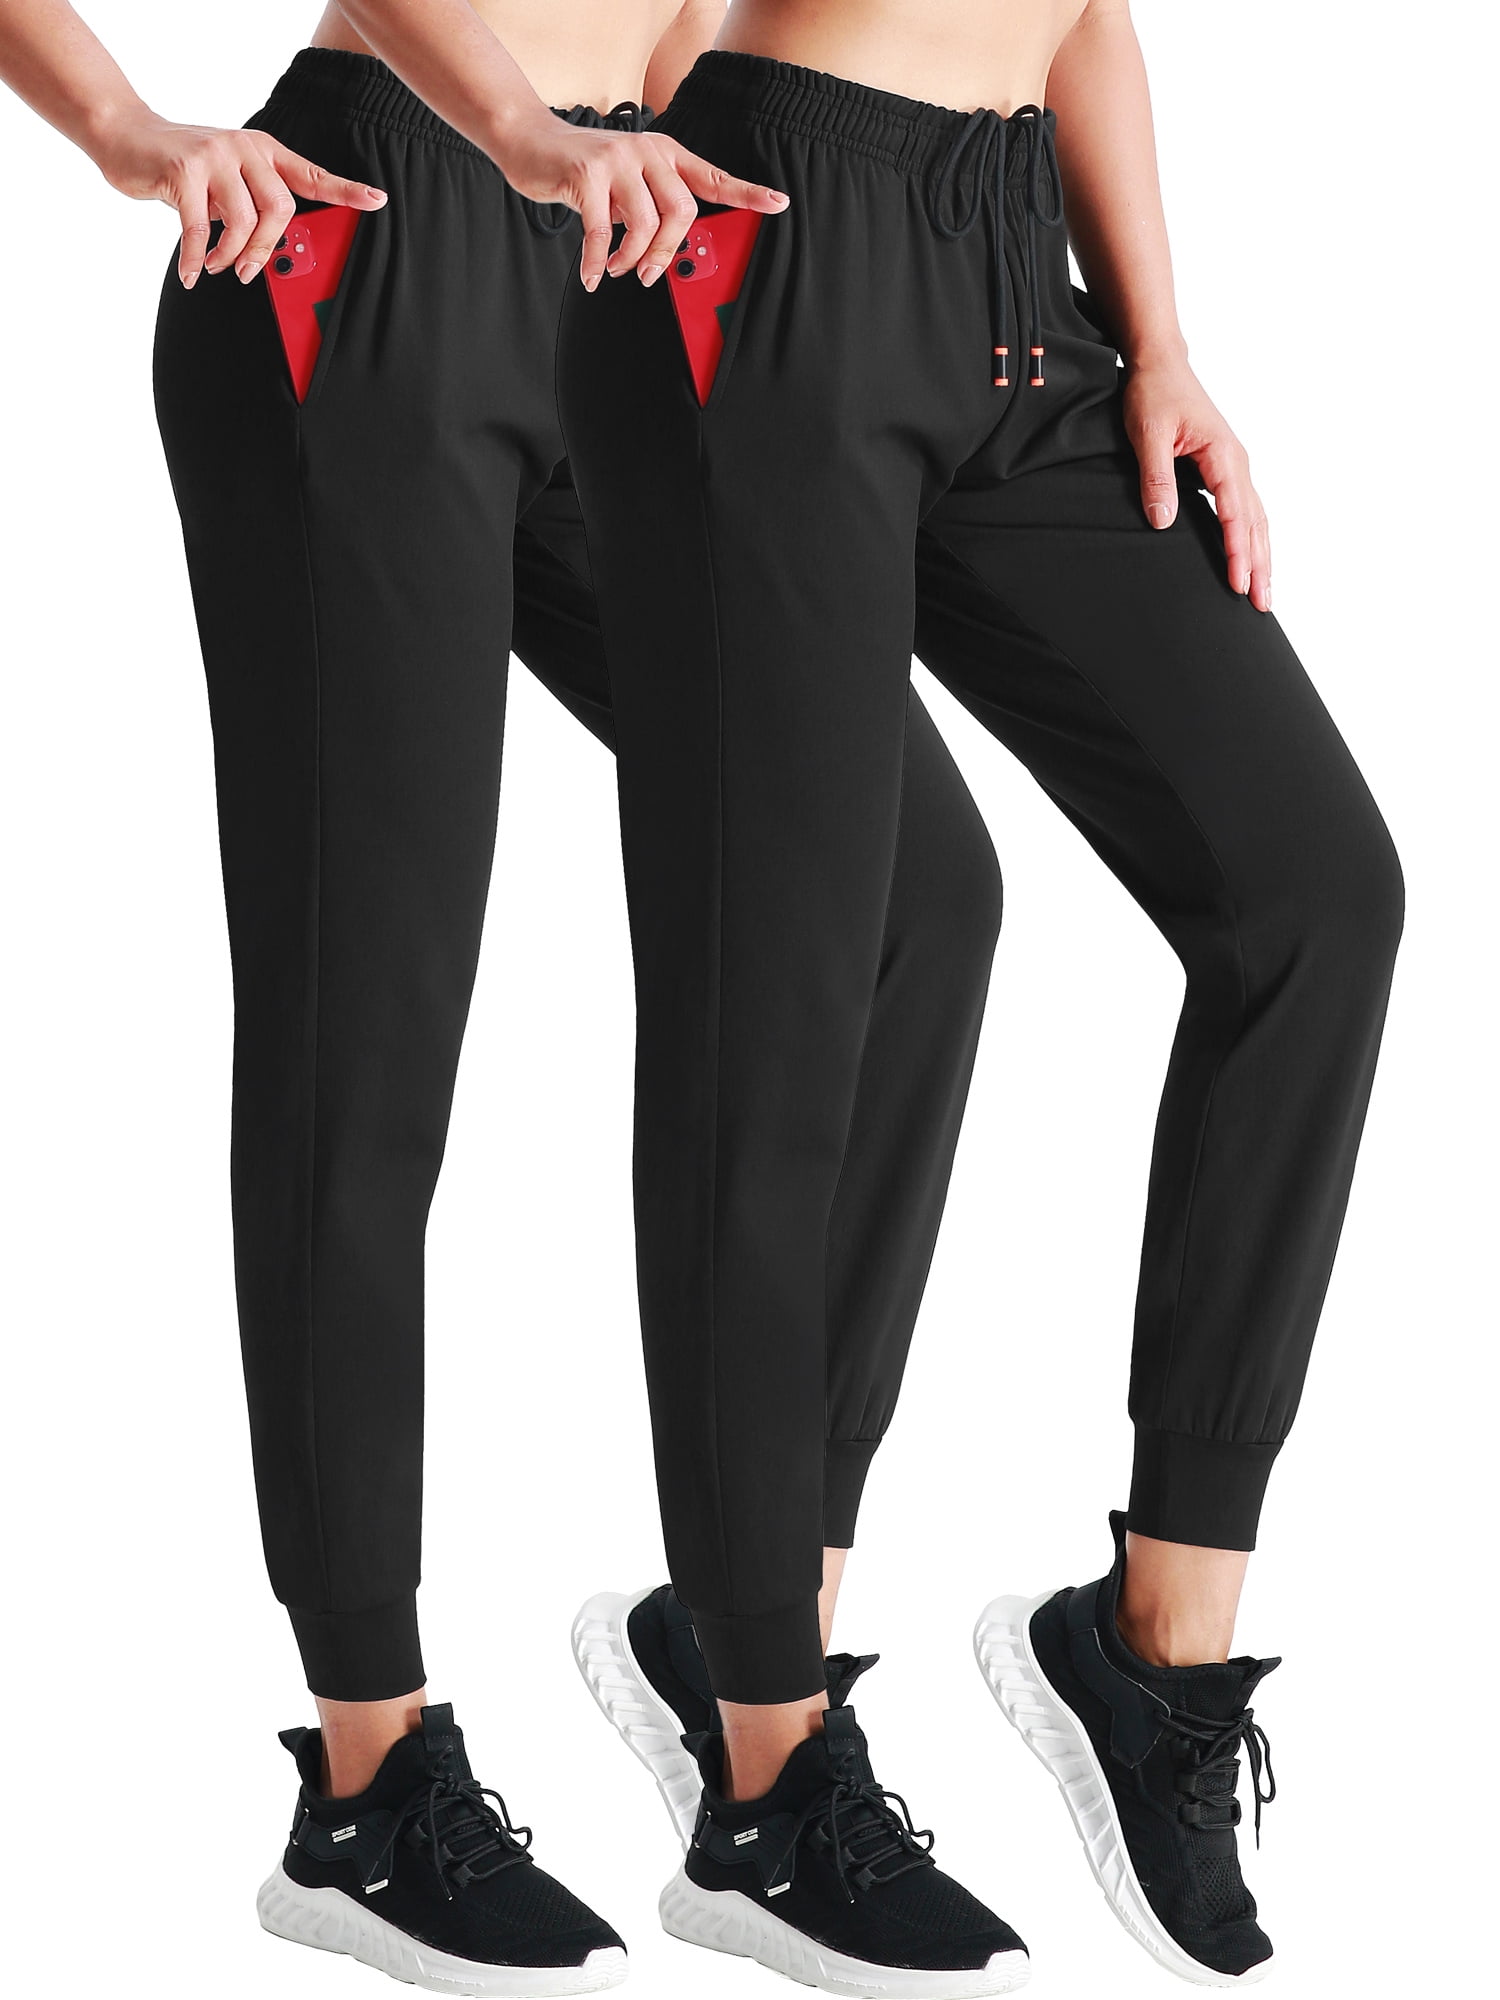 FEDTOSING Fit Joggers for Women High Waist Tapered Sweatpants